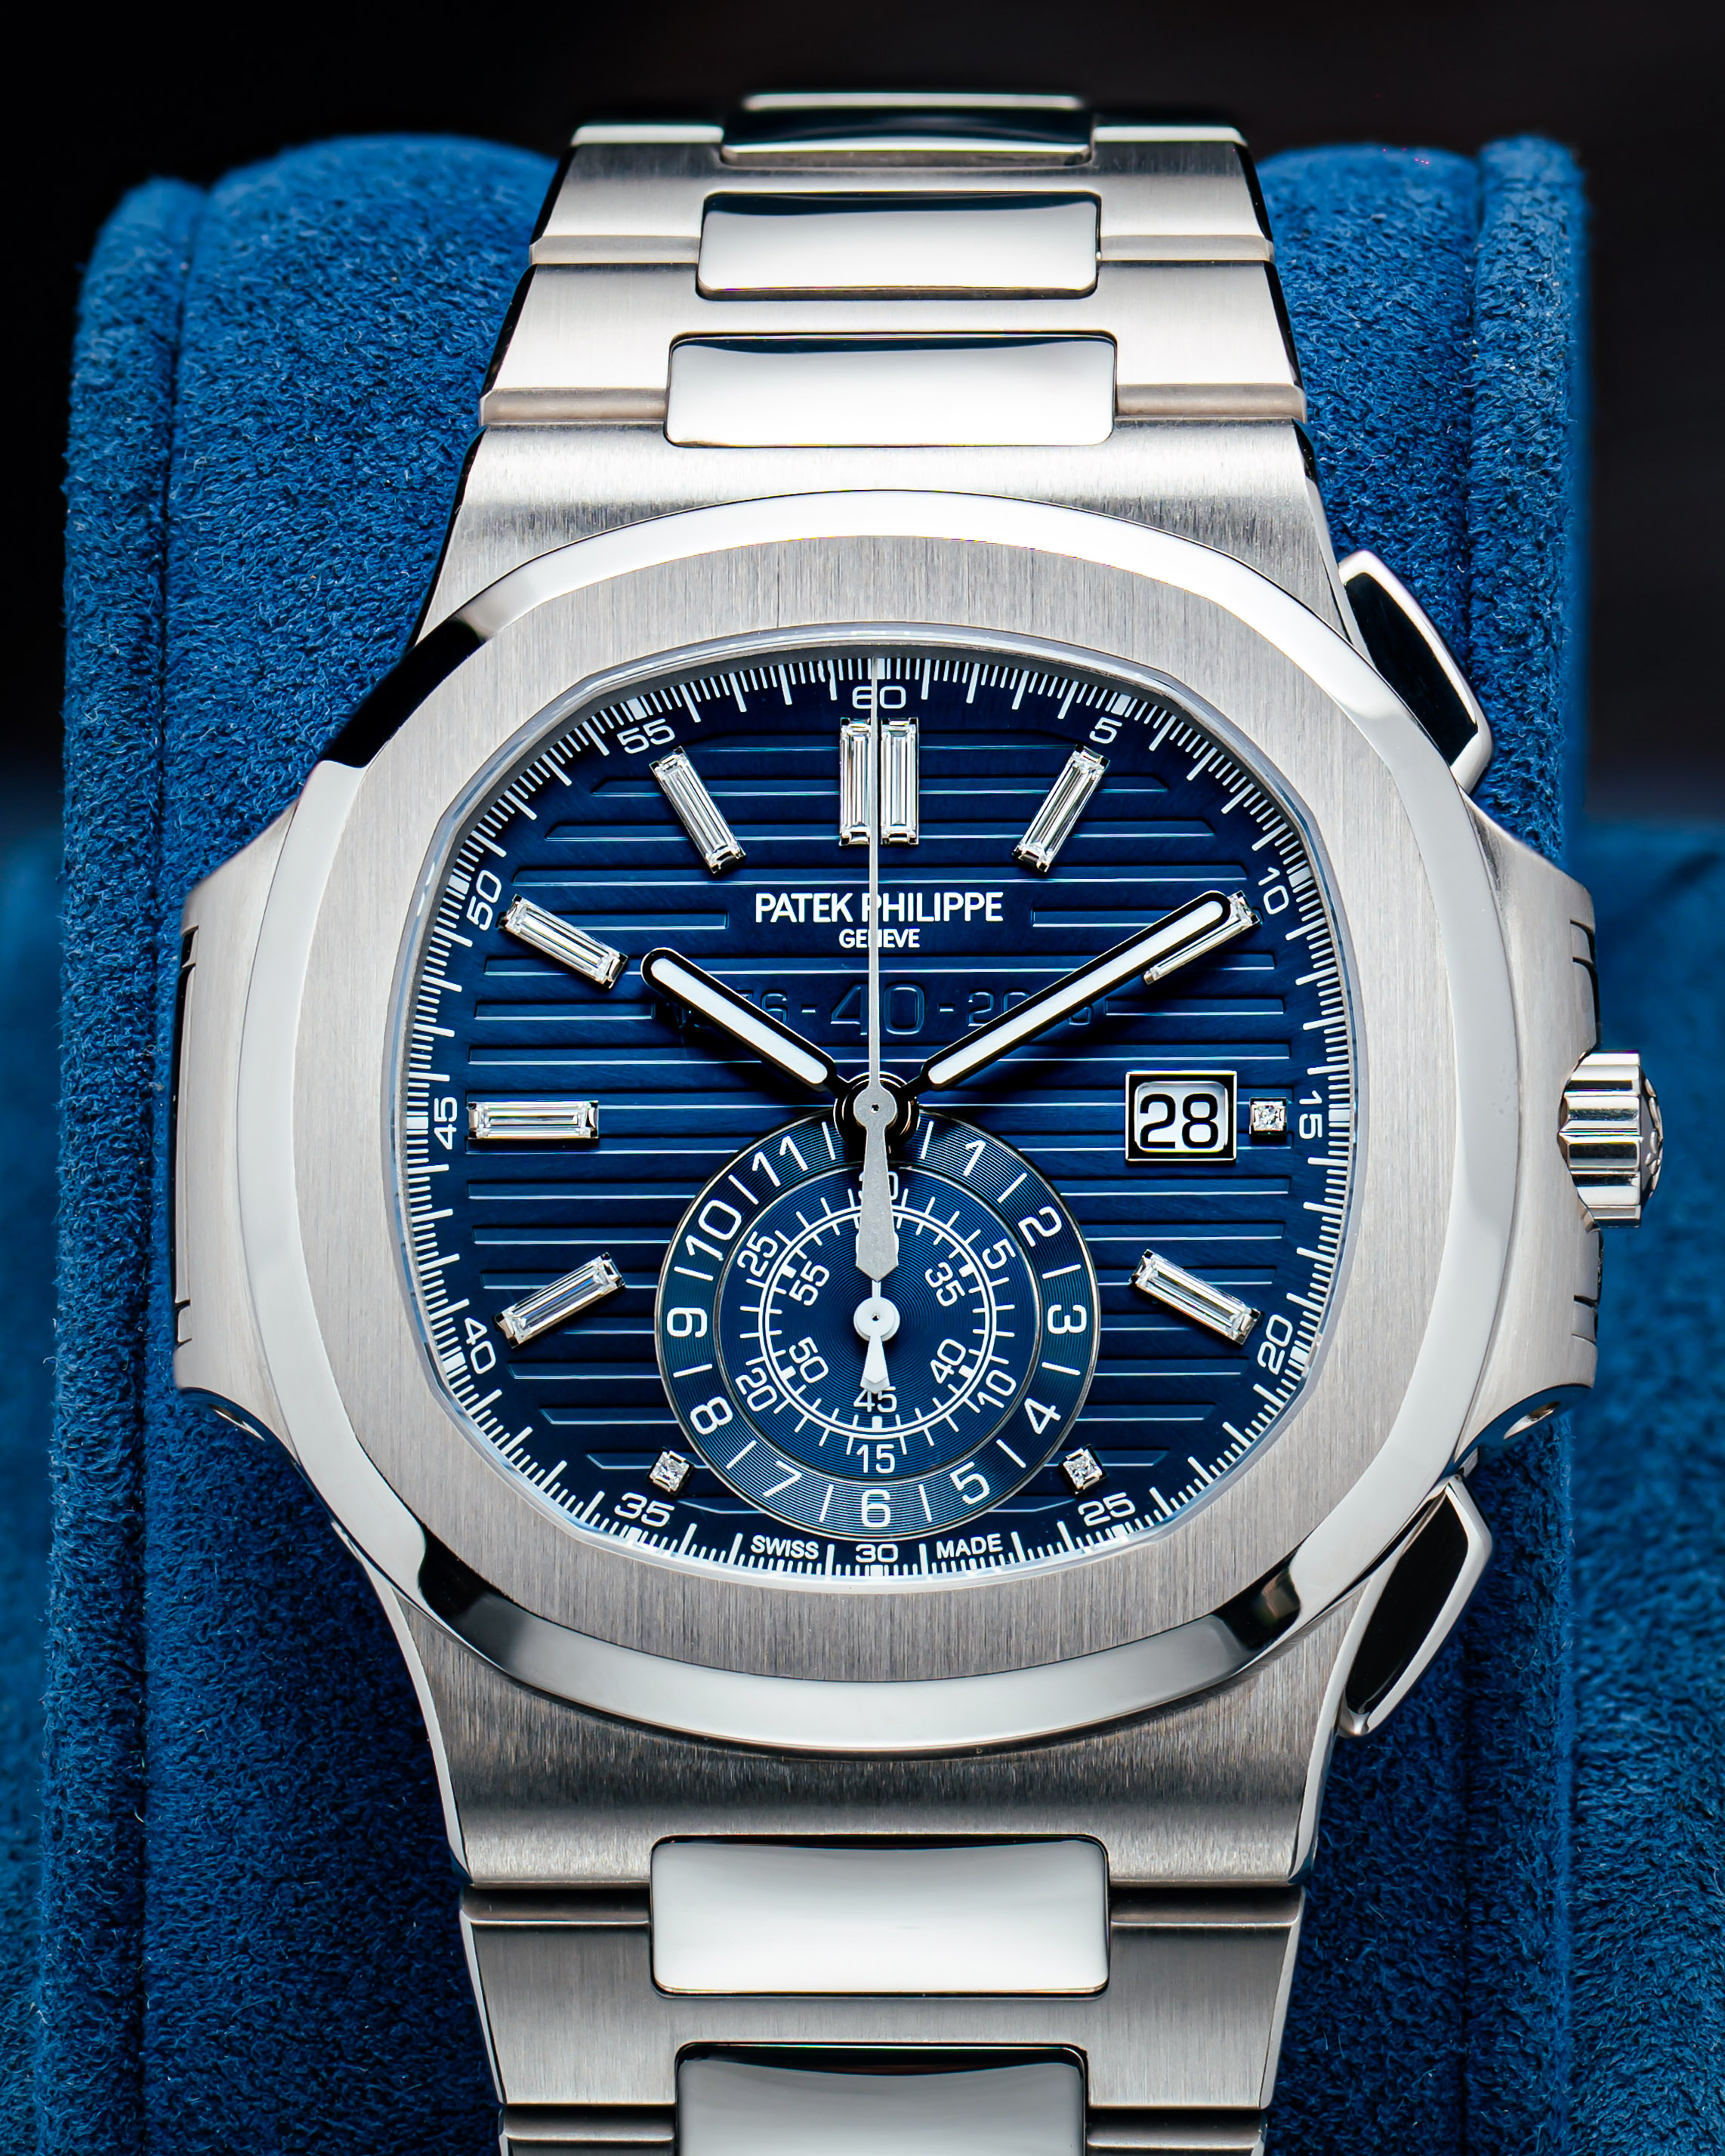 18K White Gold 44 mm Case with Blue Dial, Index Hour Markers, Date Function, and Chronograph Function.